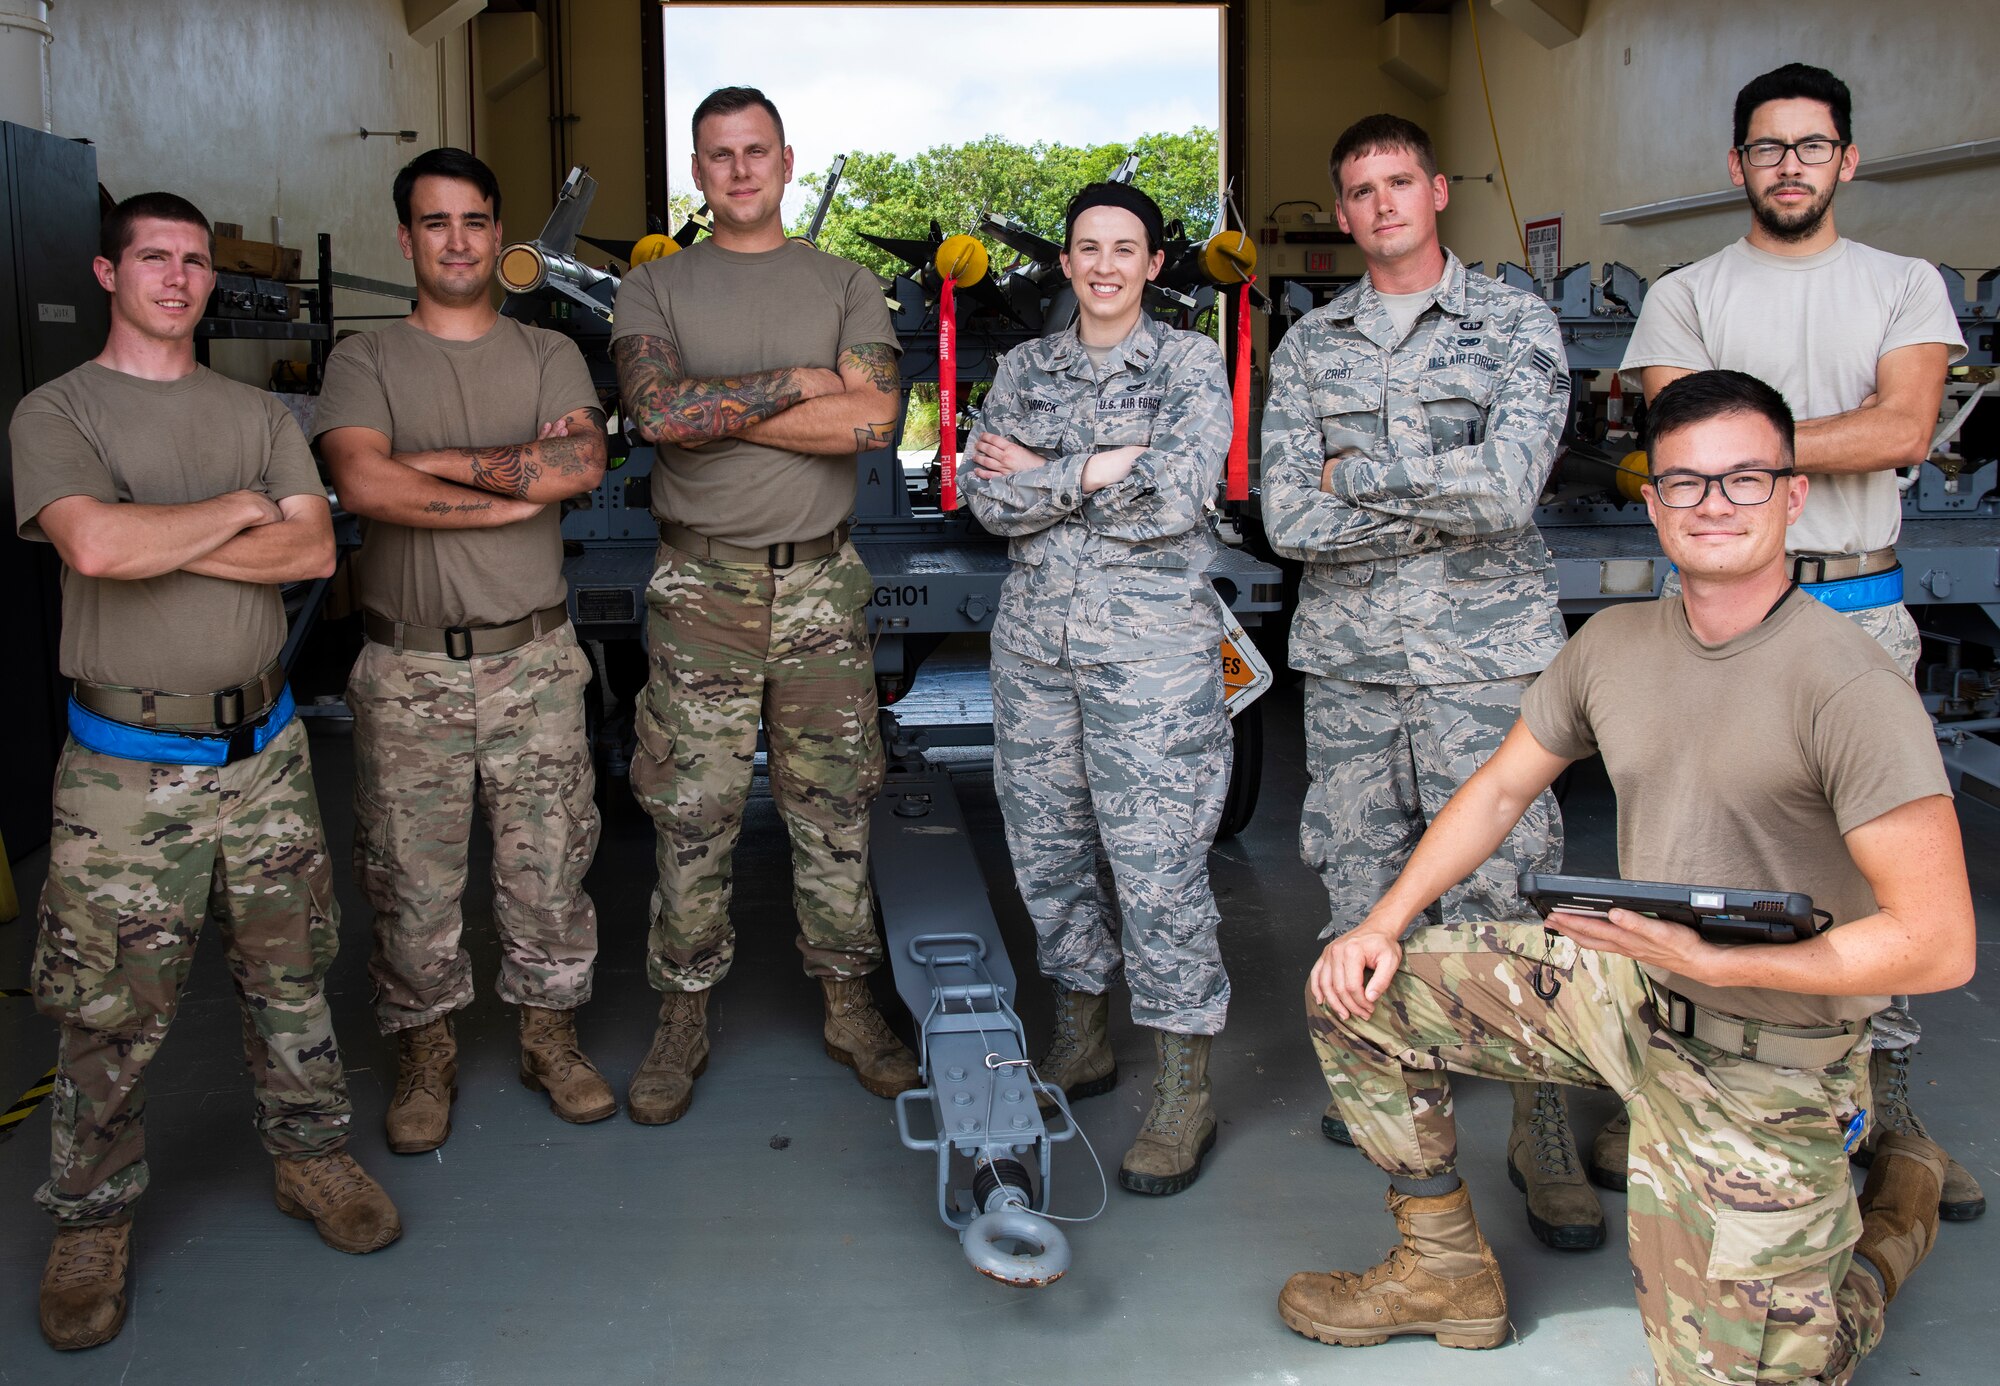 U.S. Air Force 2nd Lt. Megan Barrick, 36th Munitions Squadron (MUNS), Flight Commander, stands with her Airmen, Feb. 27 2020, at Andersen Air Force Base, Guam.